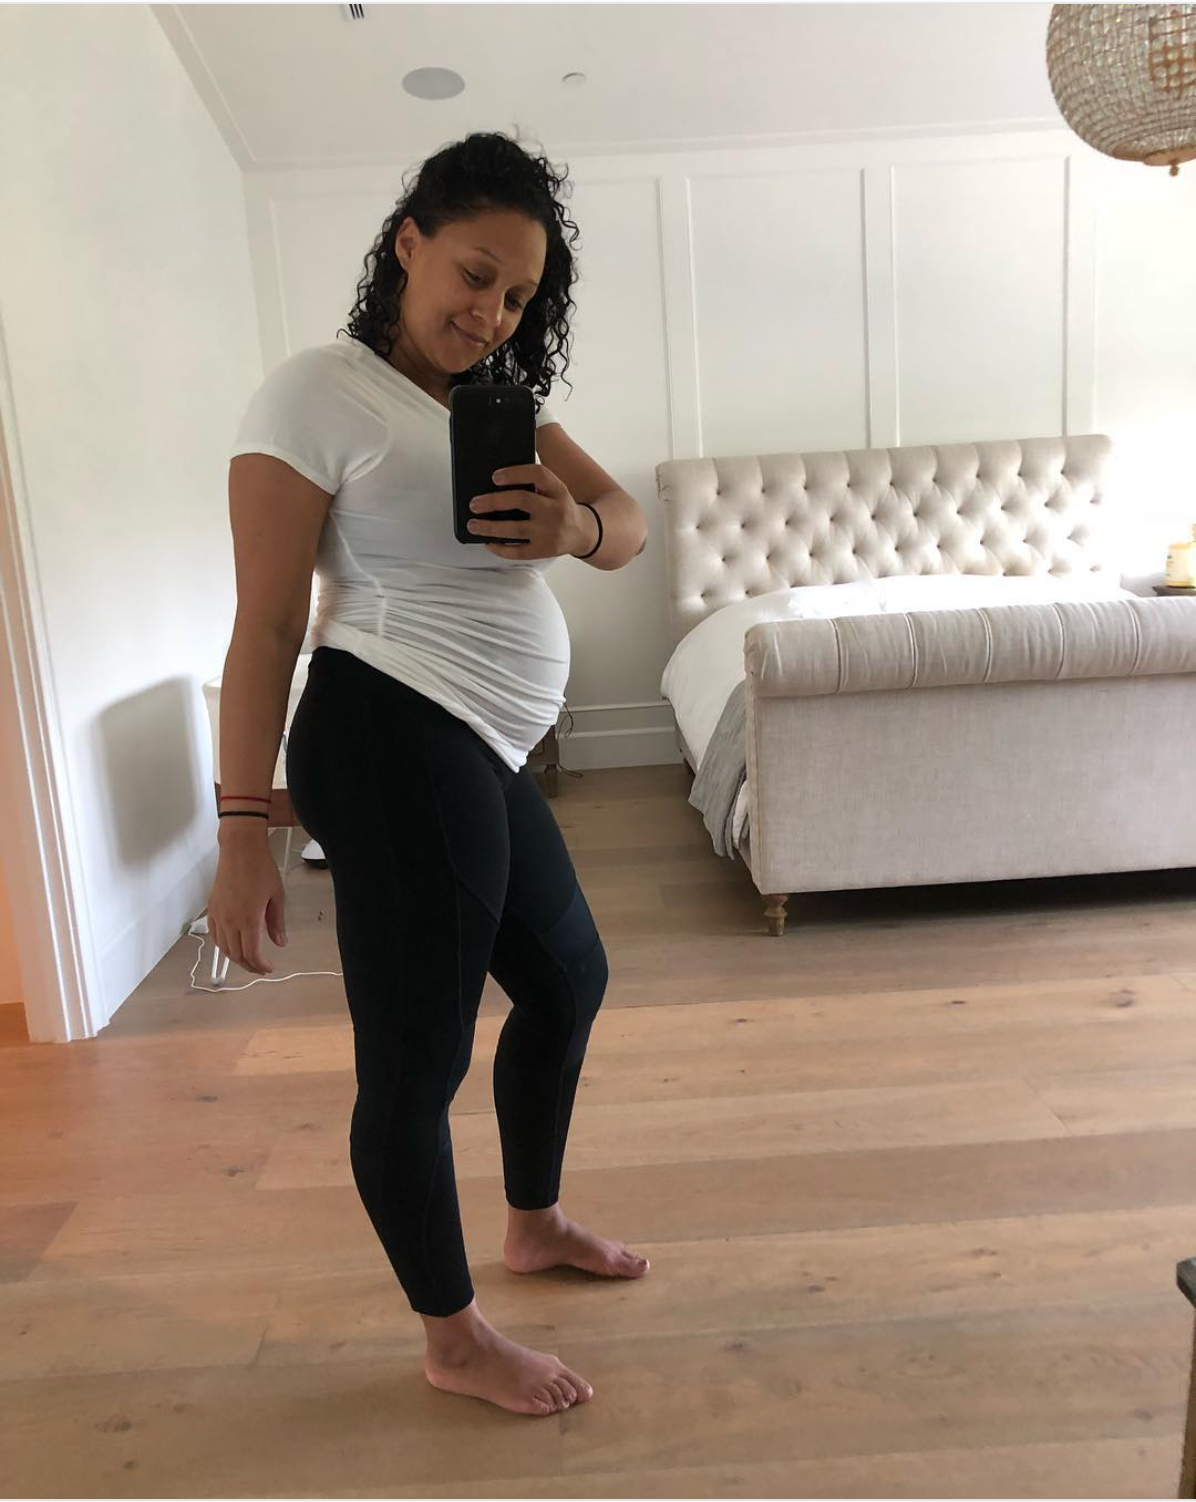 Tia Mowry-Hardrict Embraces Her Post-Baby Body and The Realities Of Not ‘Snapping Back’ Right Away
